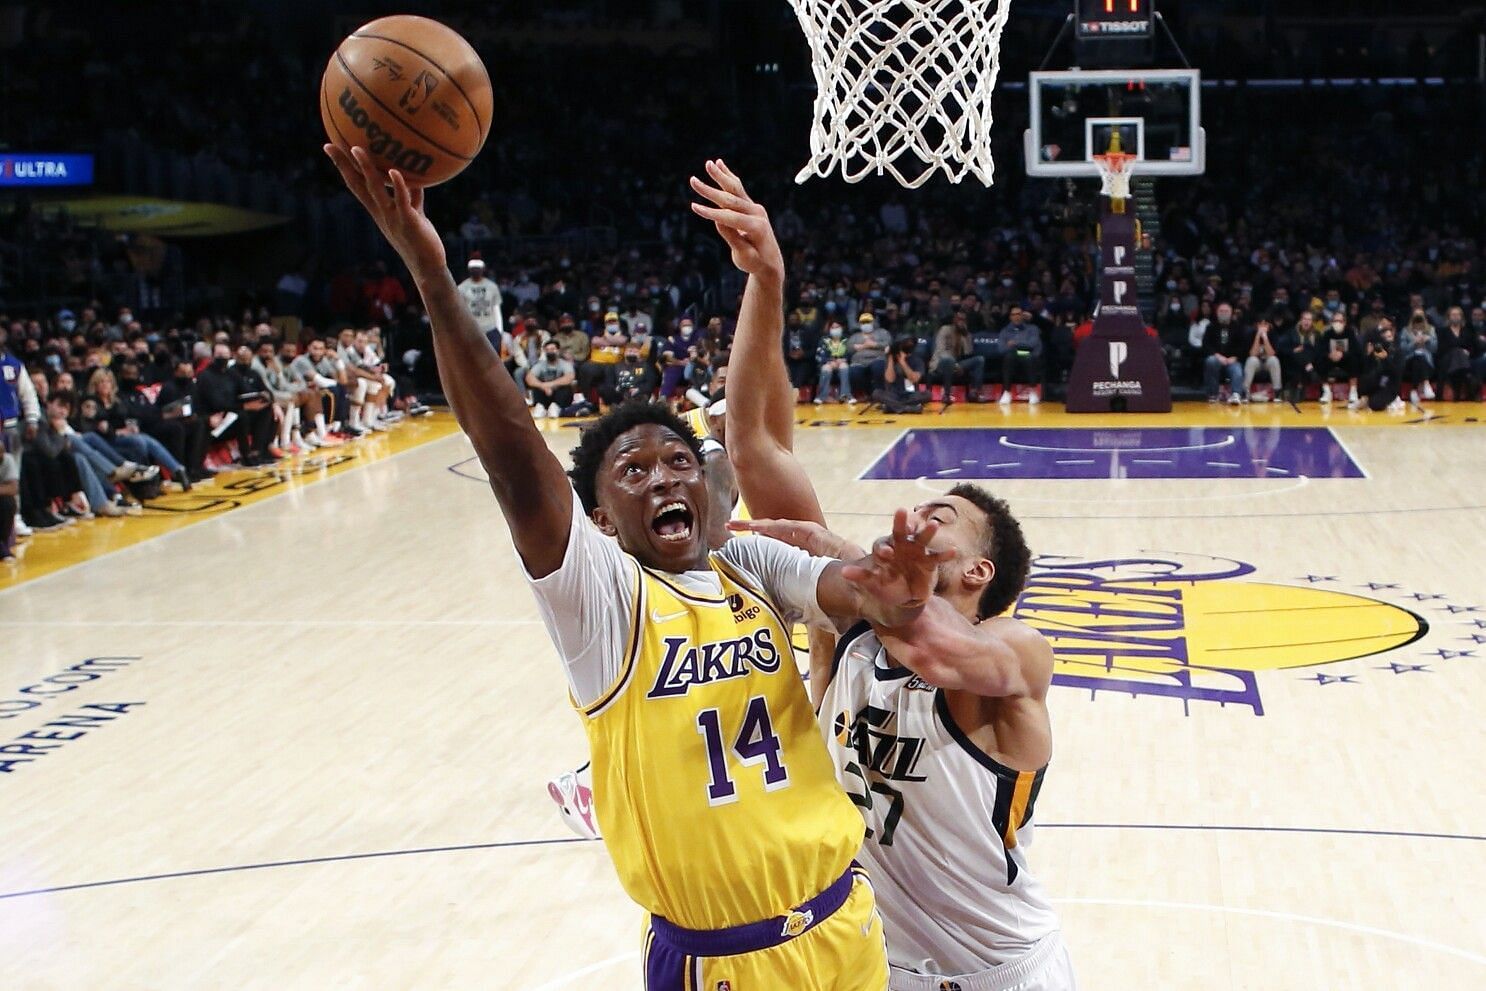 Stanley Johnson, in his hometown, had one of his best games of the season against Rudy Gobert and the Utah Jazz.